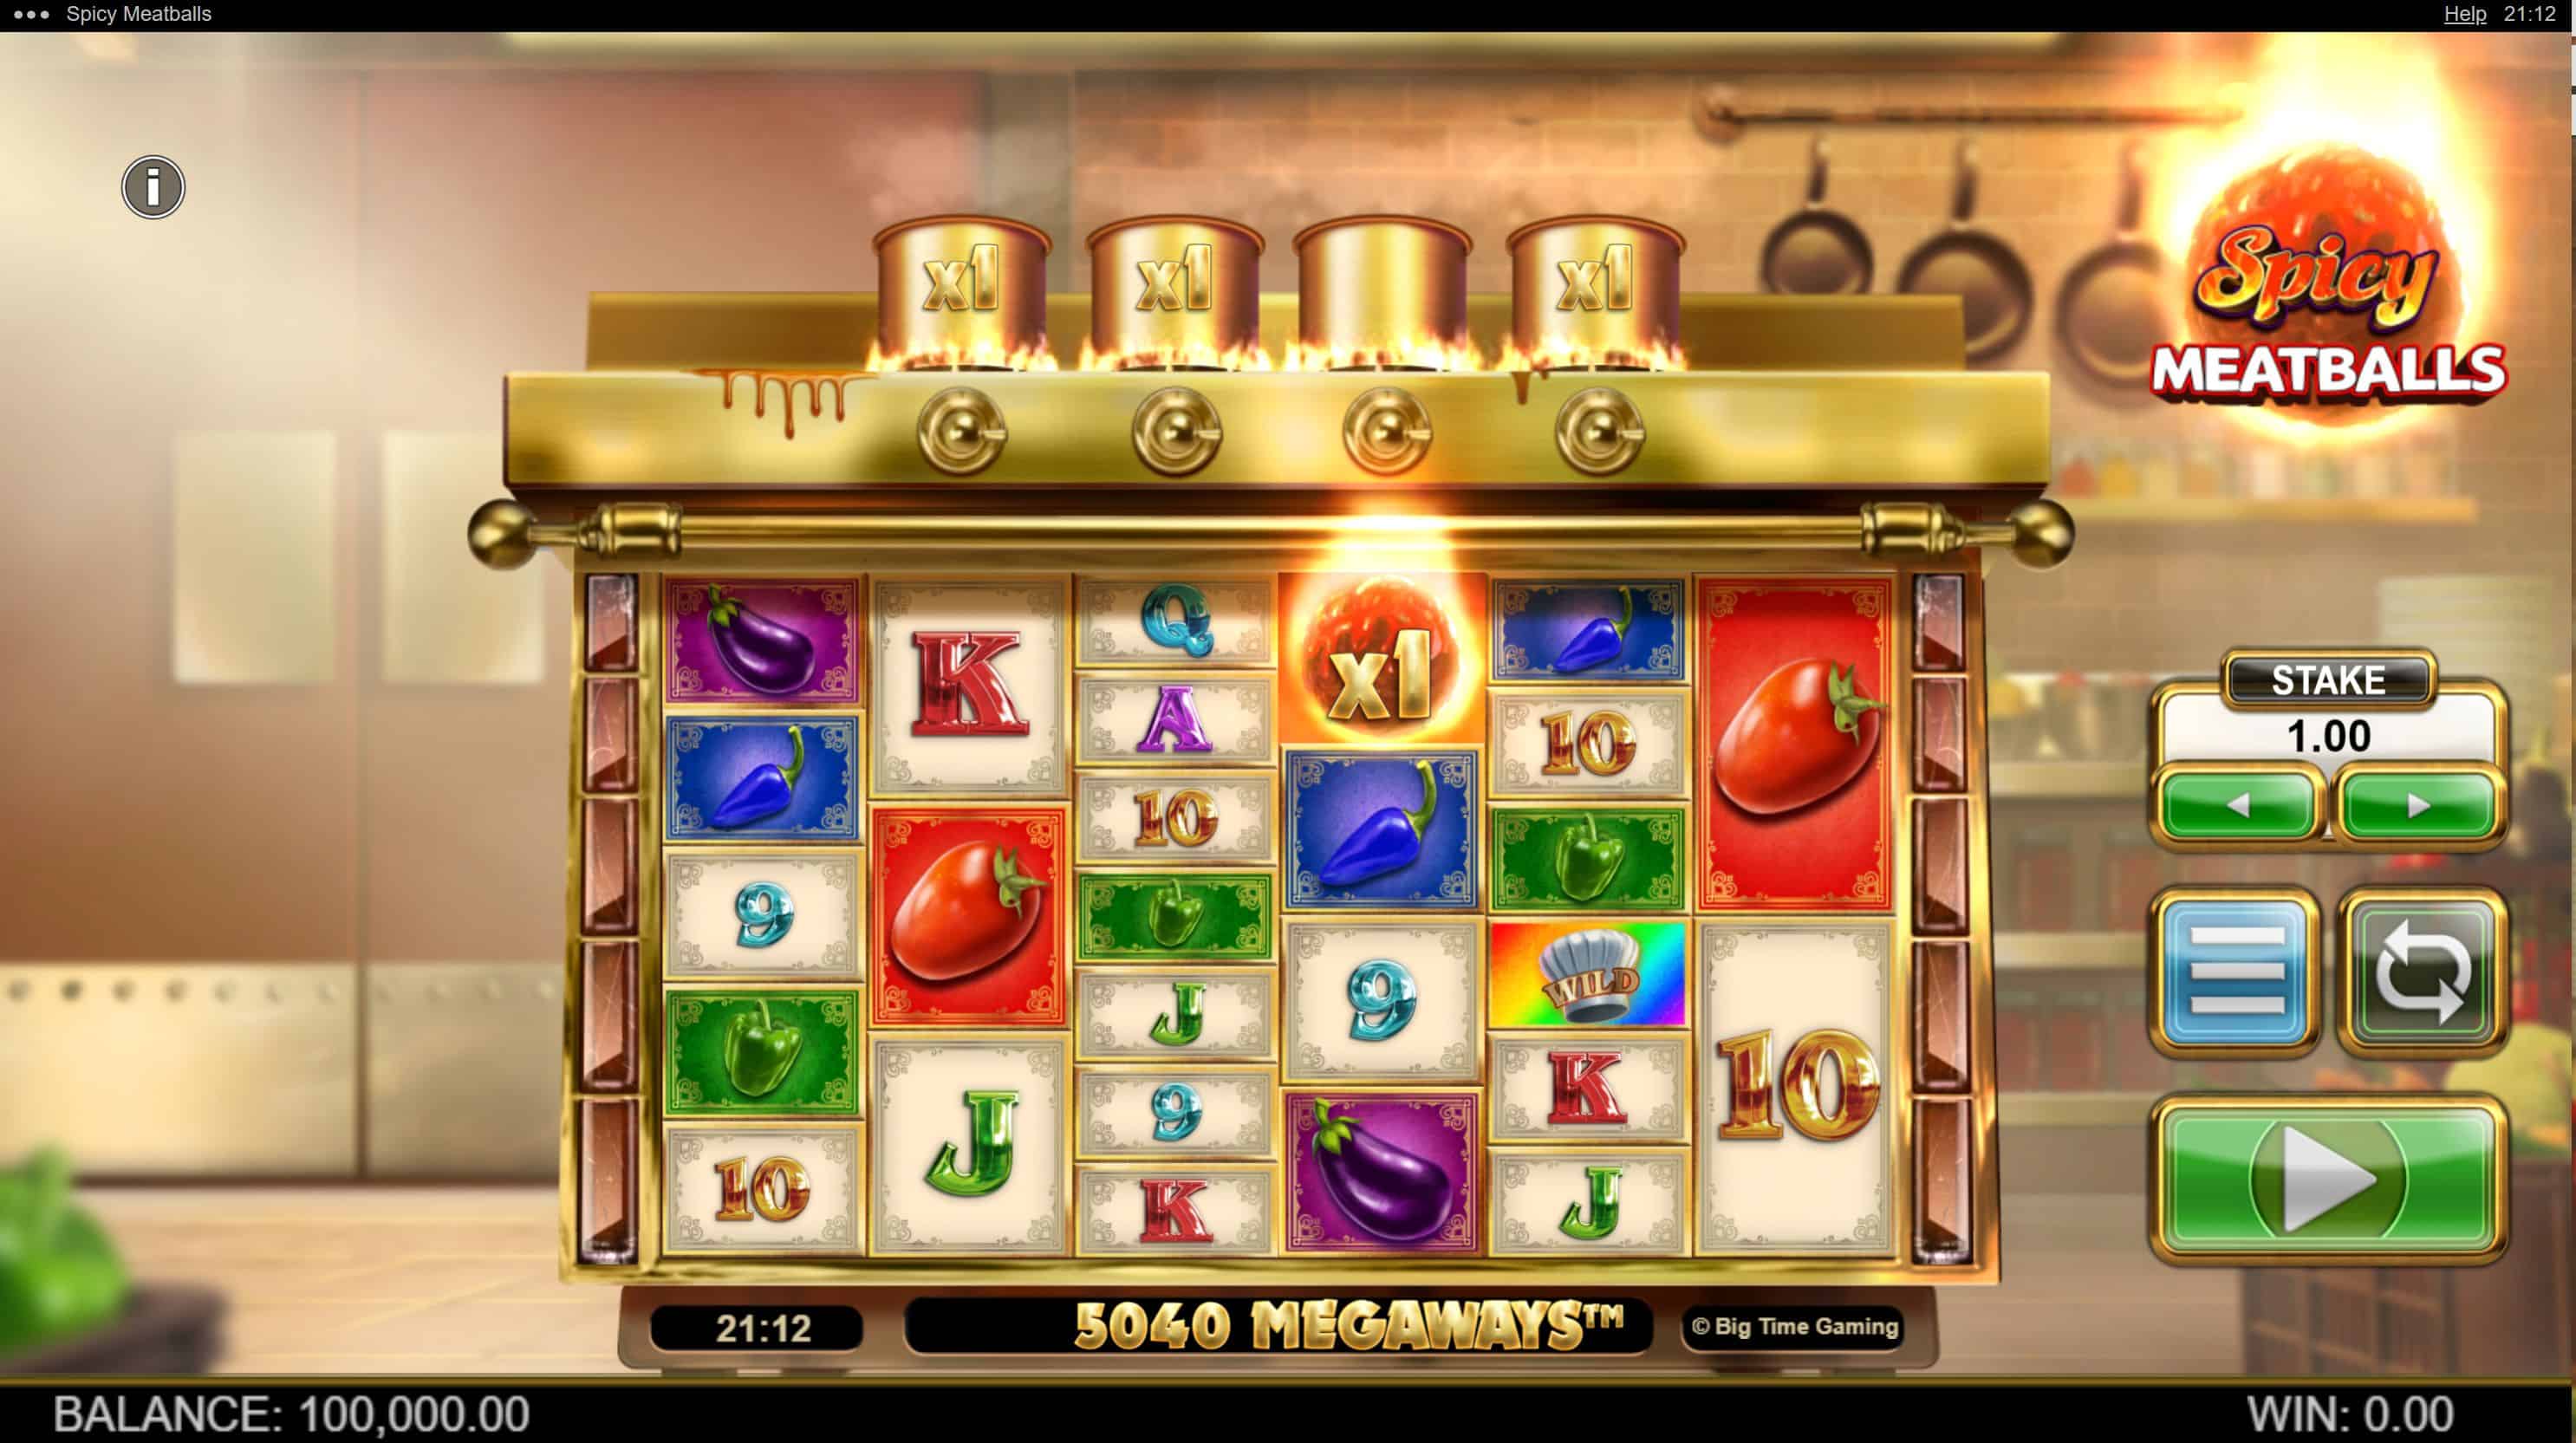 Spicy Meatballs Slot Game Free Play at Casino Ireland 01